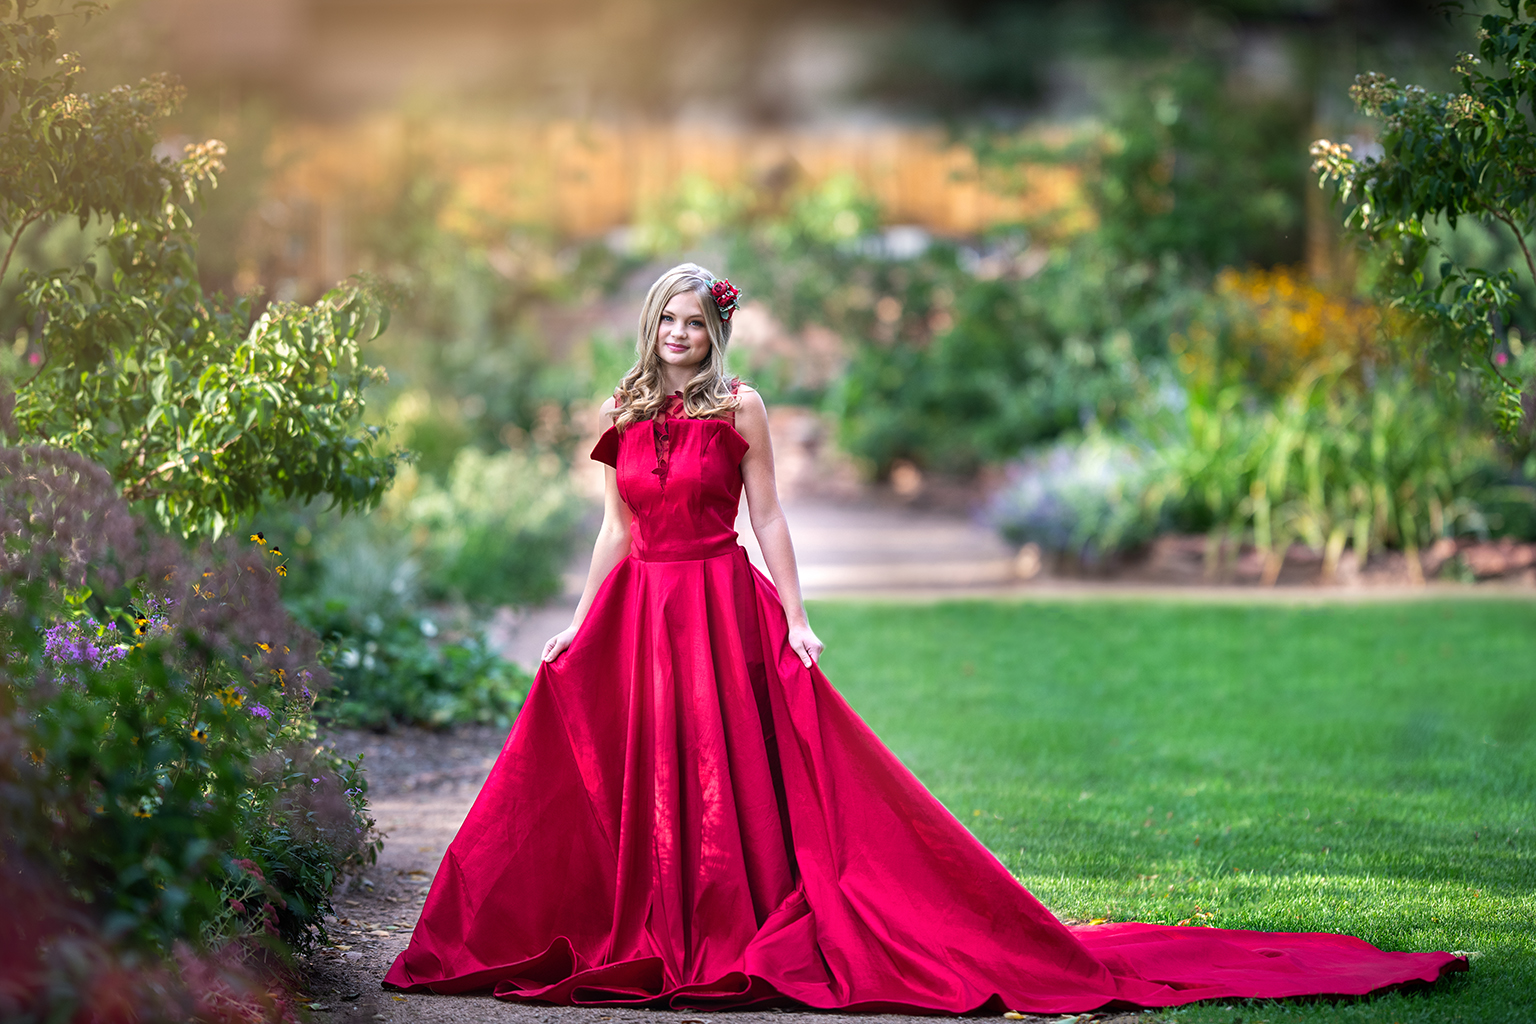 A young girl wearing a red gown.